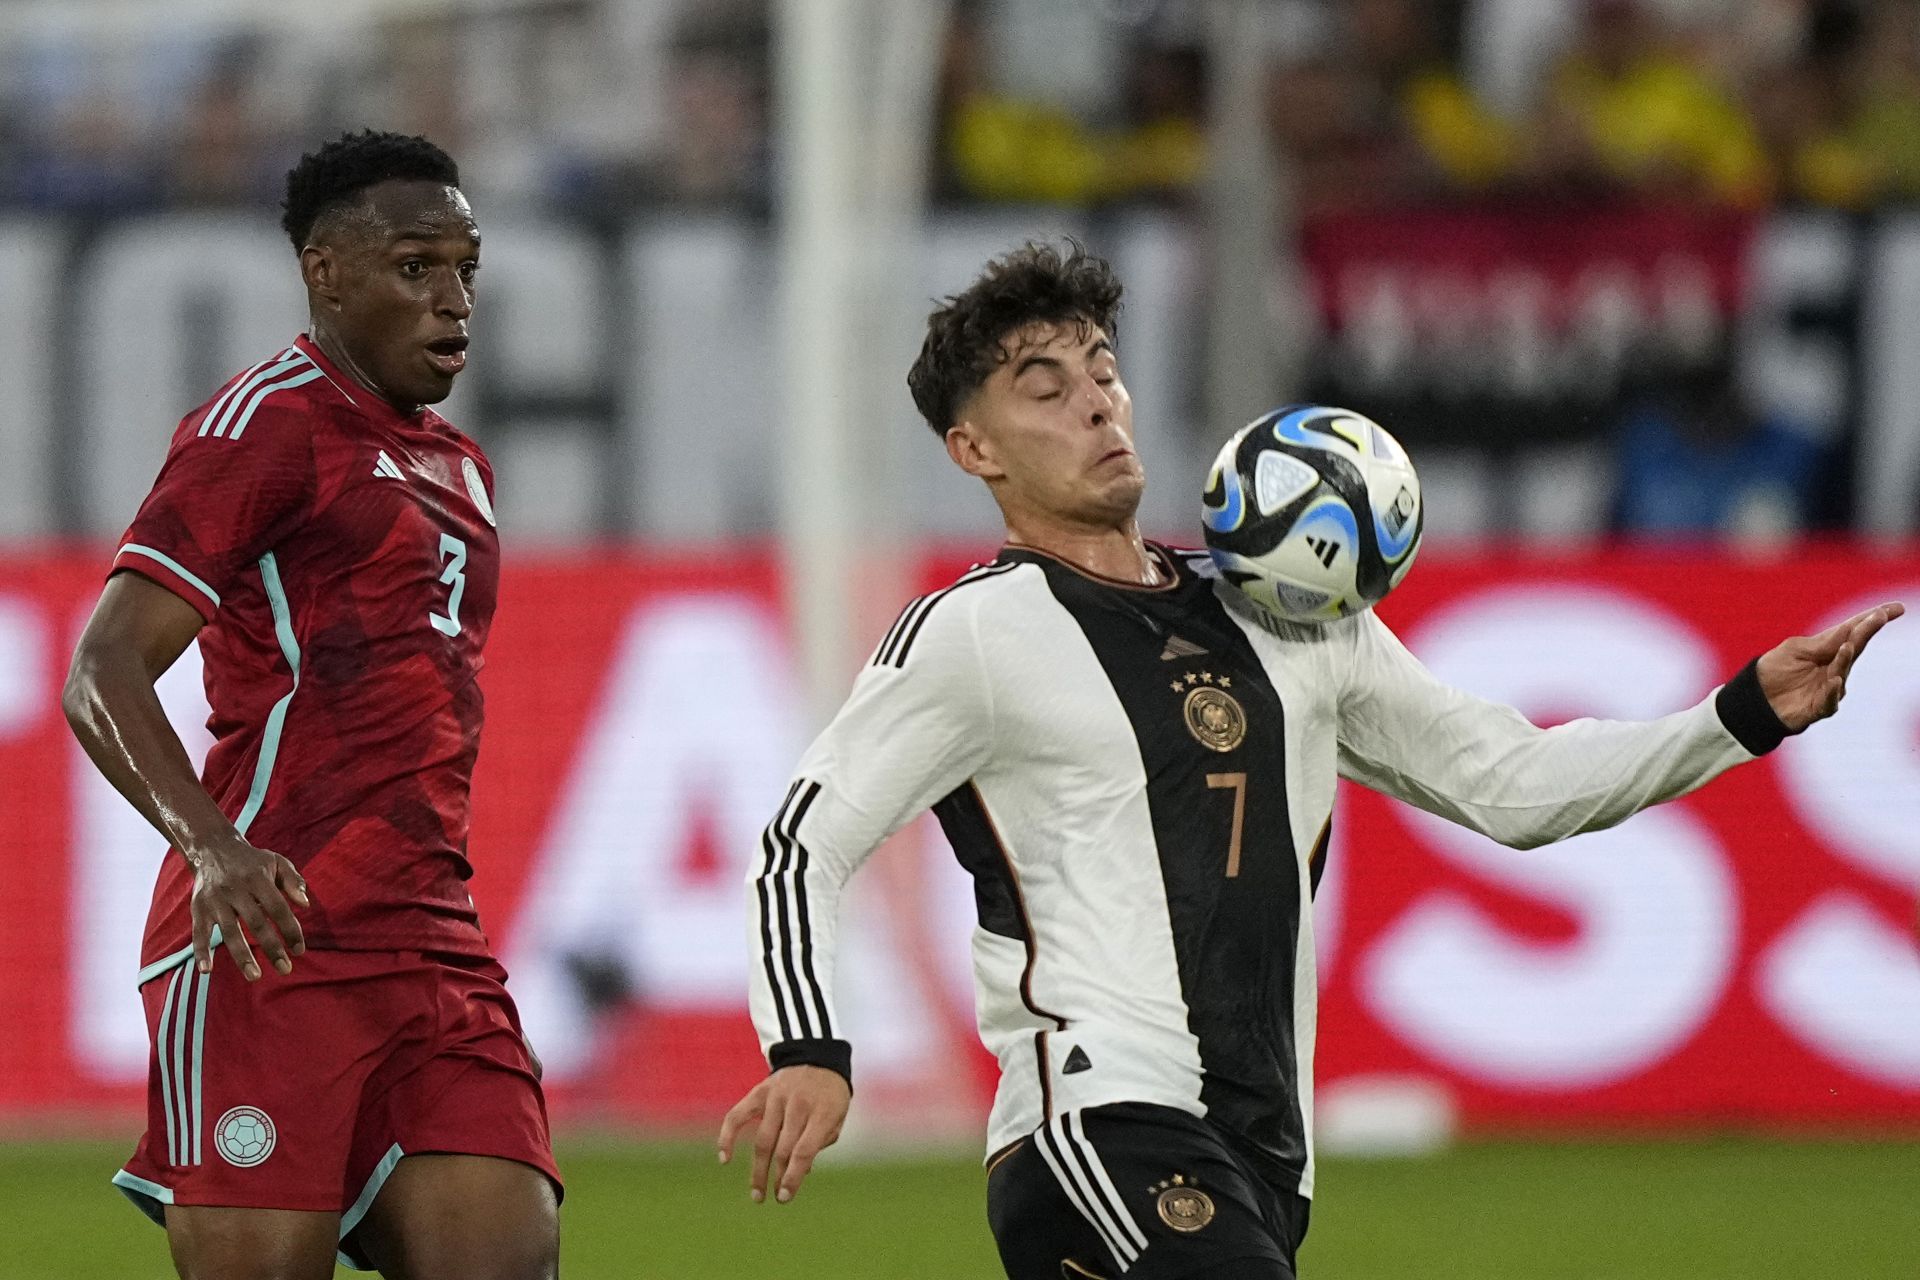 Havertz was almost headed to Real Madrid.